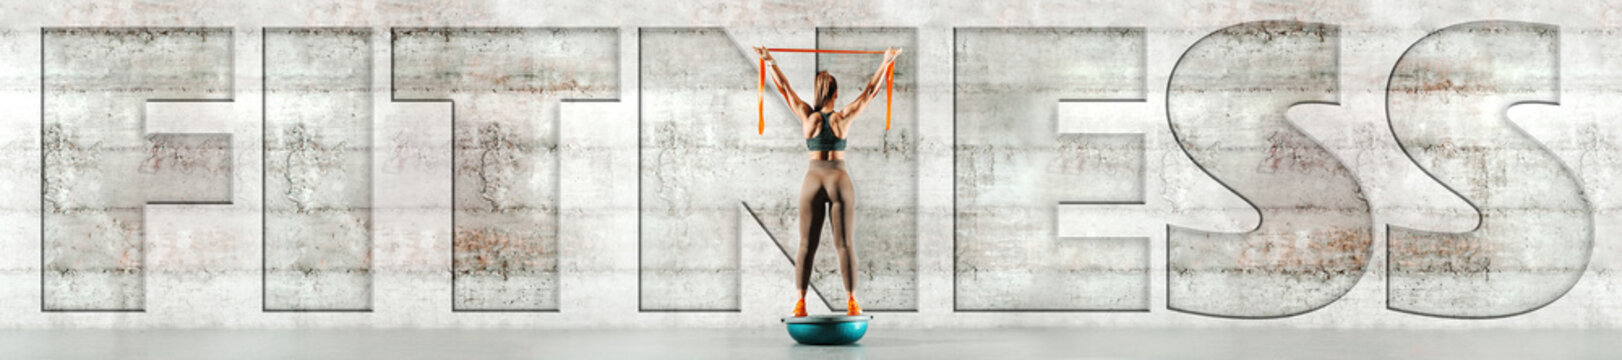 Full length of sporty woman standing on bosu ball and holding ribbon. Back turned, in background gray wall. Upper-case fitness over the picture.